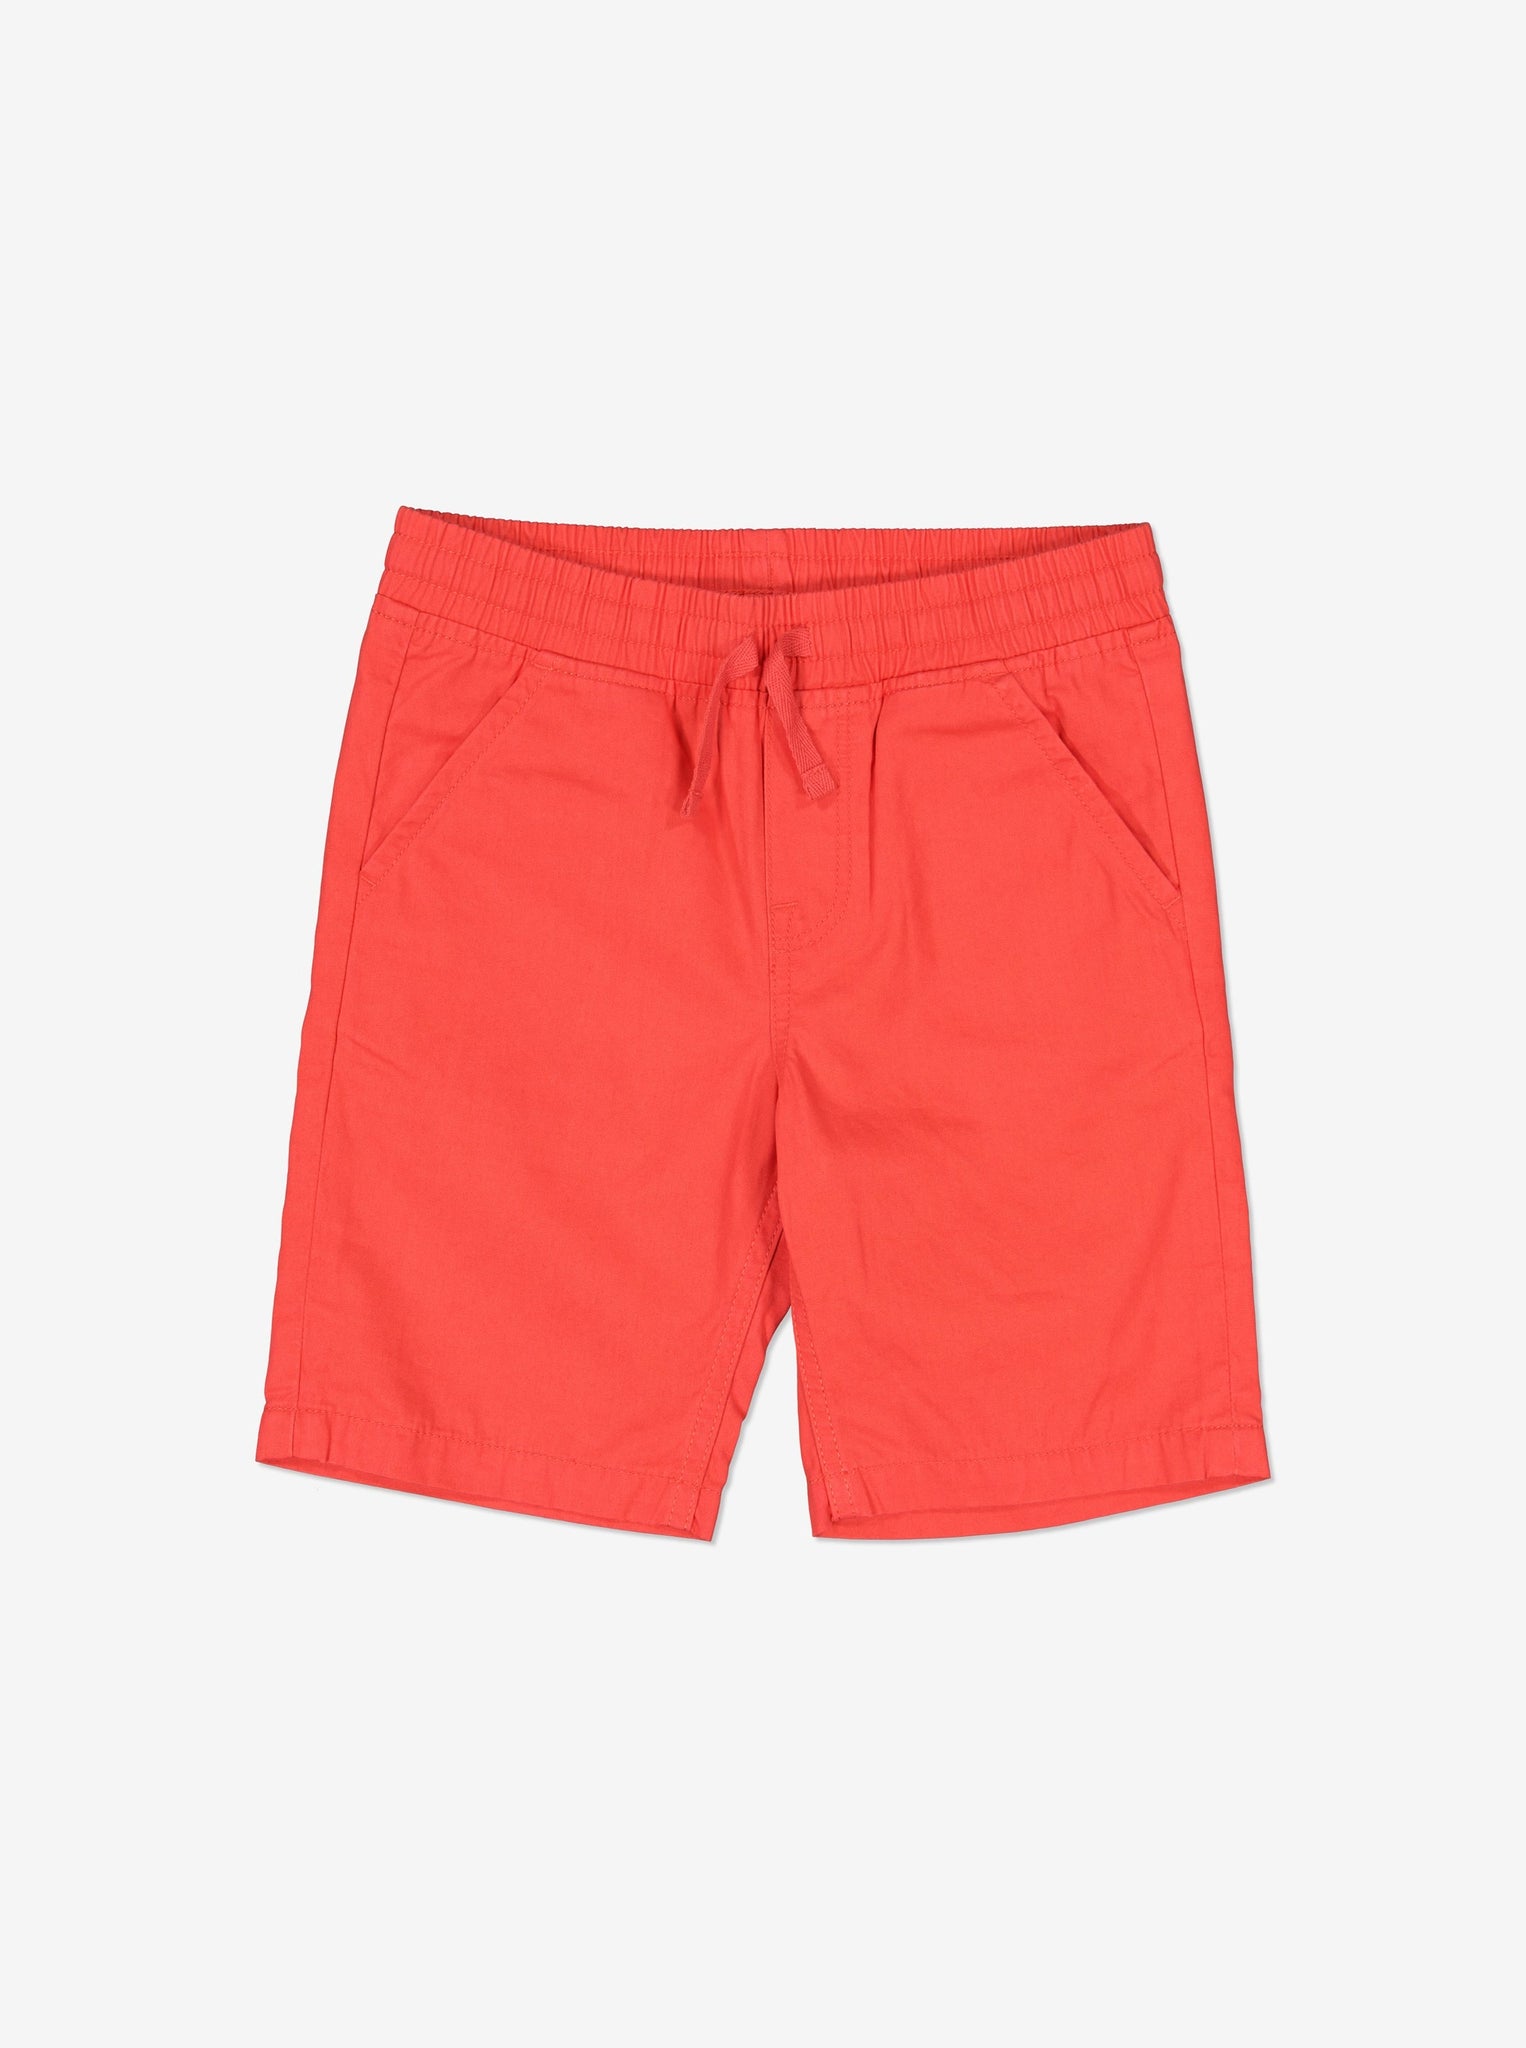 Red Organic Cotton Kids Chino Shorts from Polarn O. Pyret Kidswear. Made from 100% GOTS Organic Cotton.